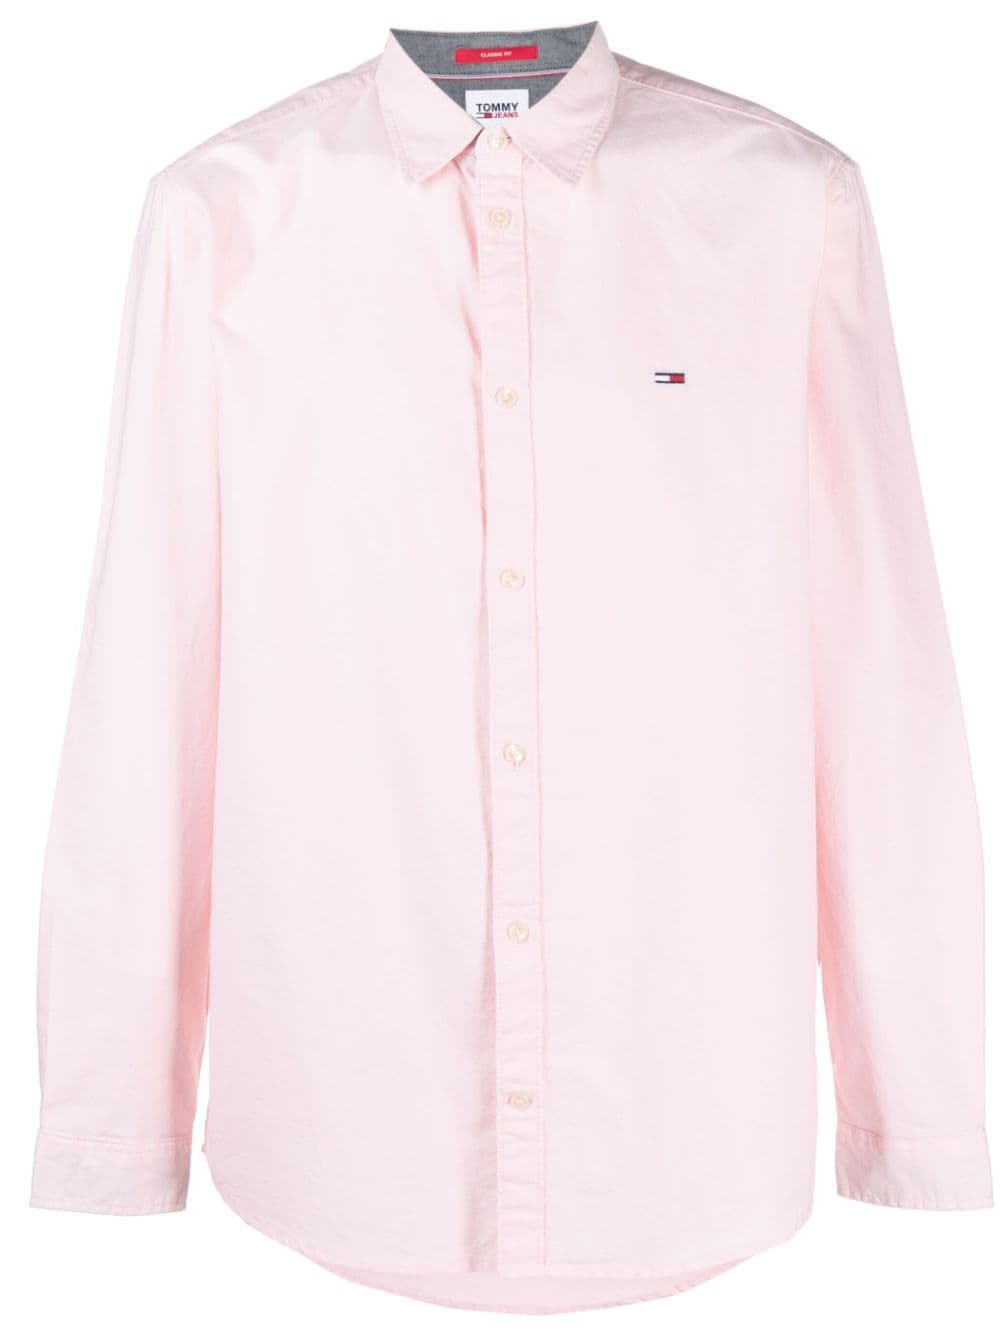 Tommy Jeans Classic Oxford Long Sleeve Shirt Pink